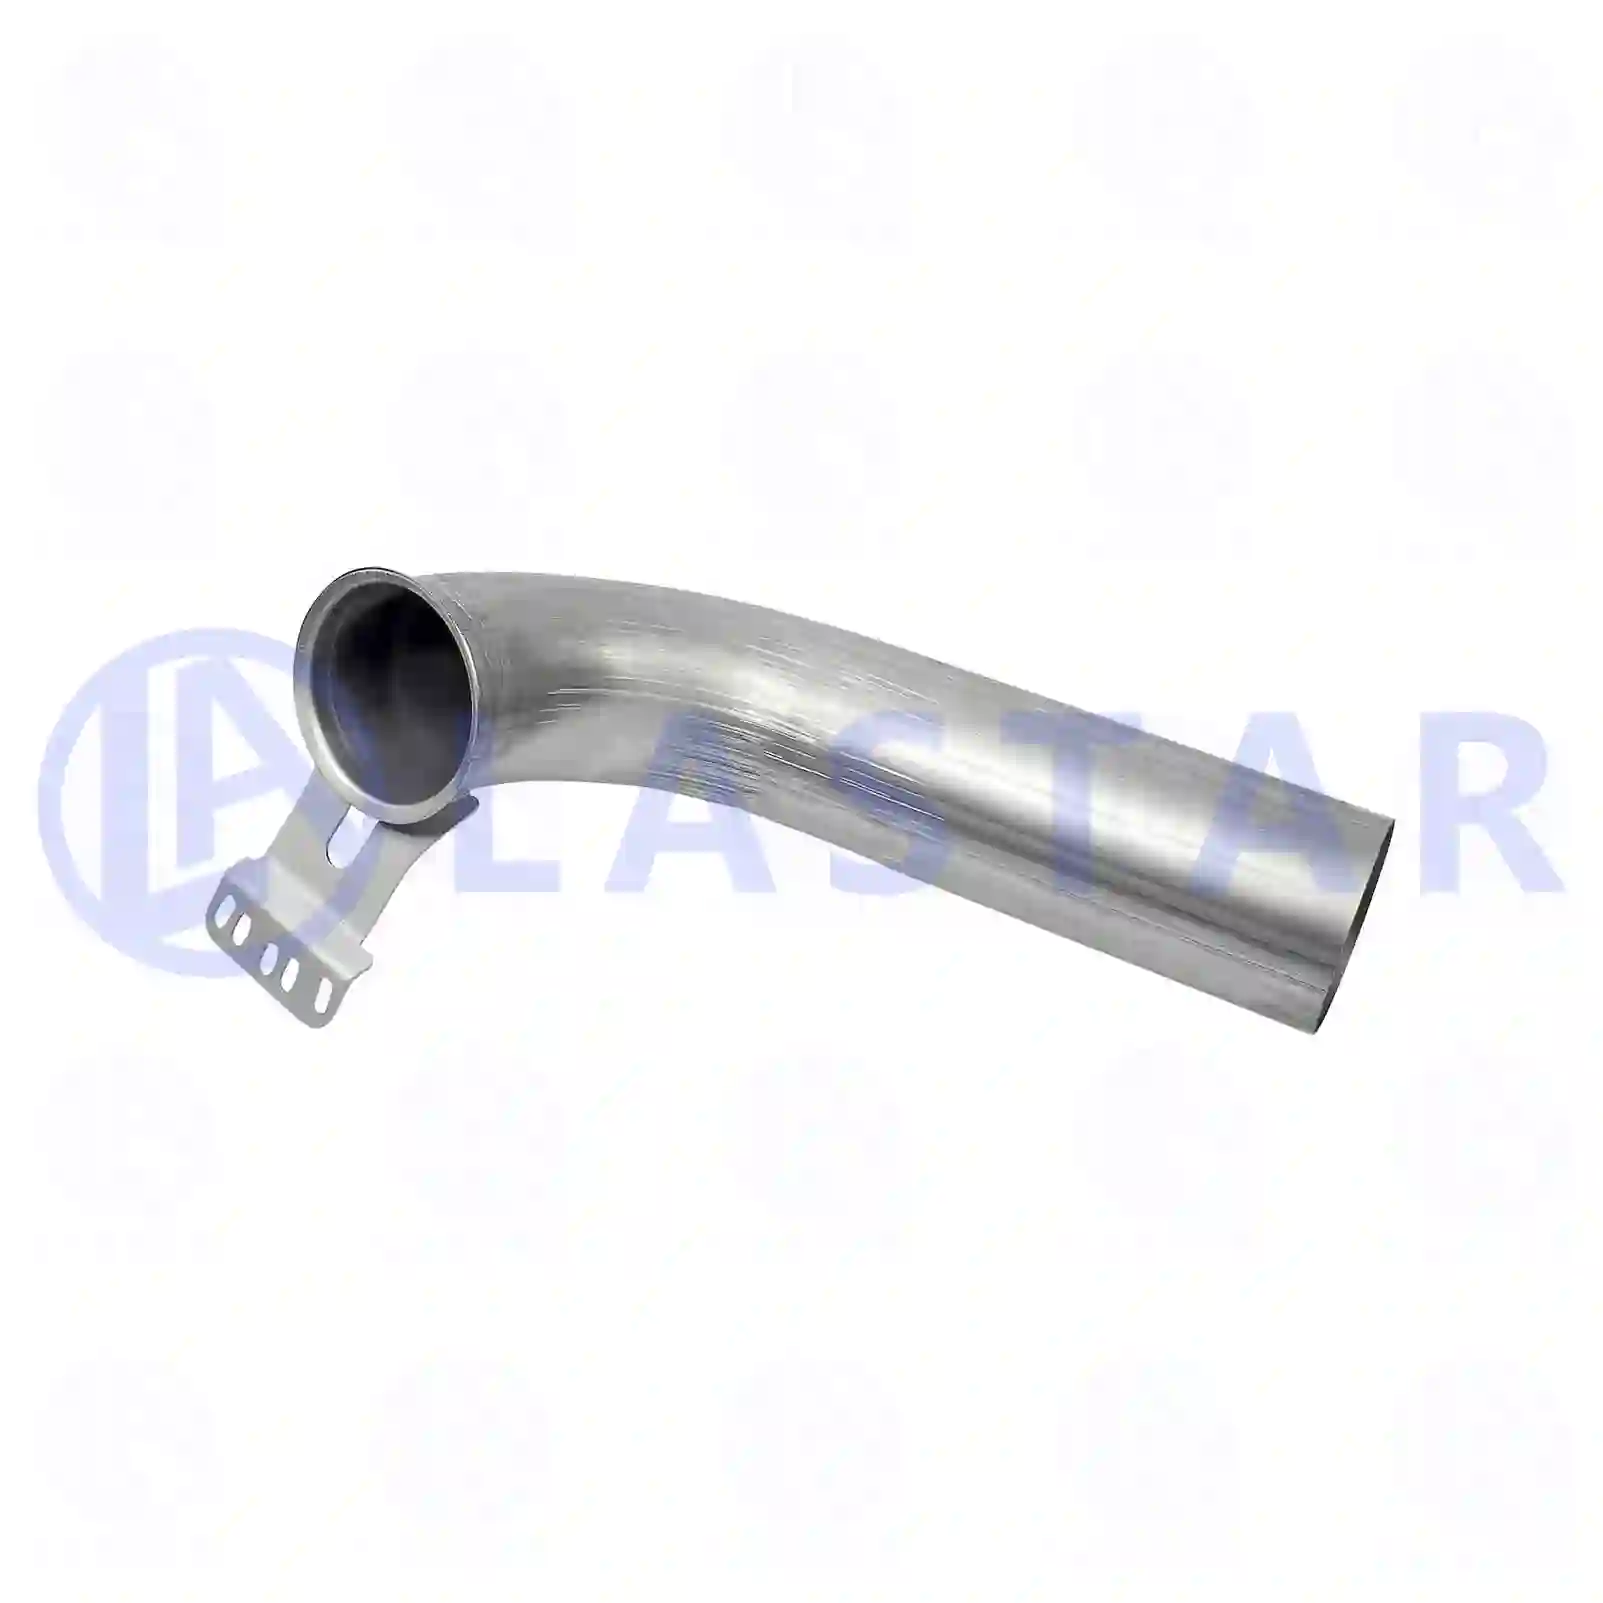 End pipe, 77707004, 1344153, 1483285, ZG10284-0008 ||  77707004 Lastar Spare Part | Truck Spare Parts, Auotomotive Spare Parts End pipe, 77707004, 1344153, 1483285, ZG10284-0008 ||  77707004 Lastar Spare Part | Truck Spare Parts, Auotomotive Spare Parts